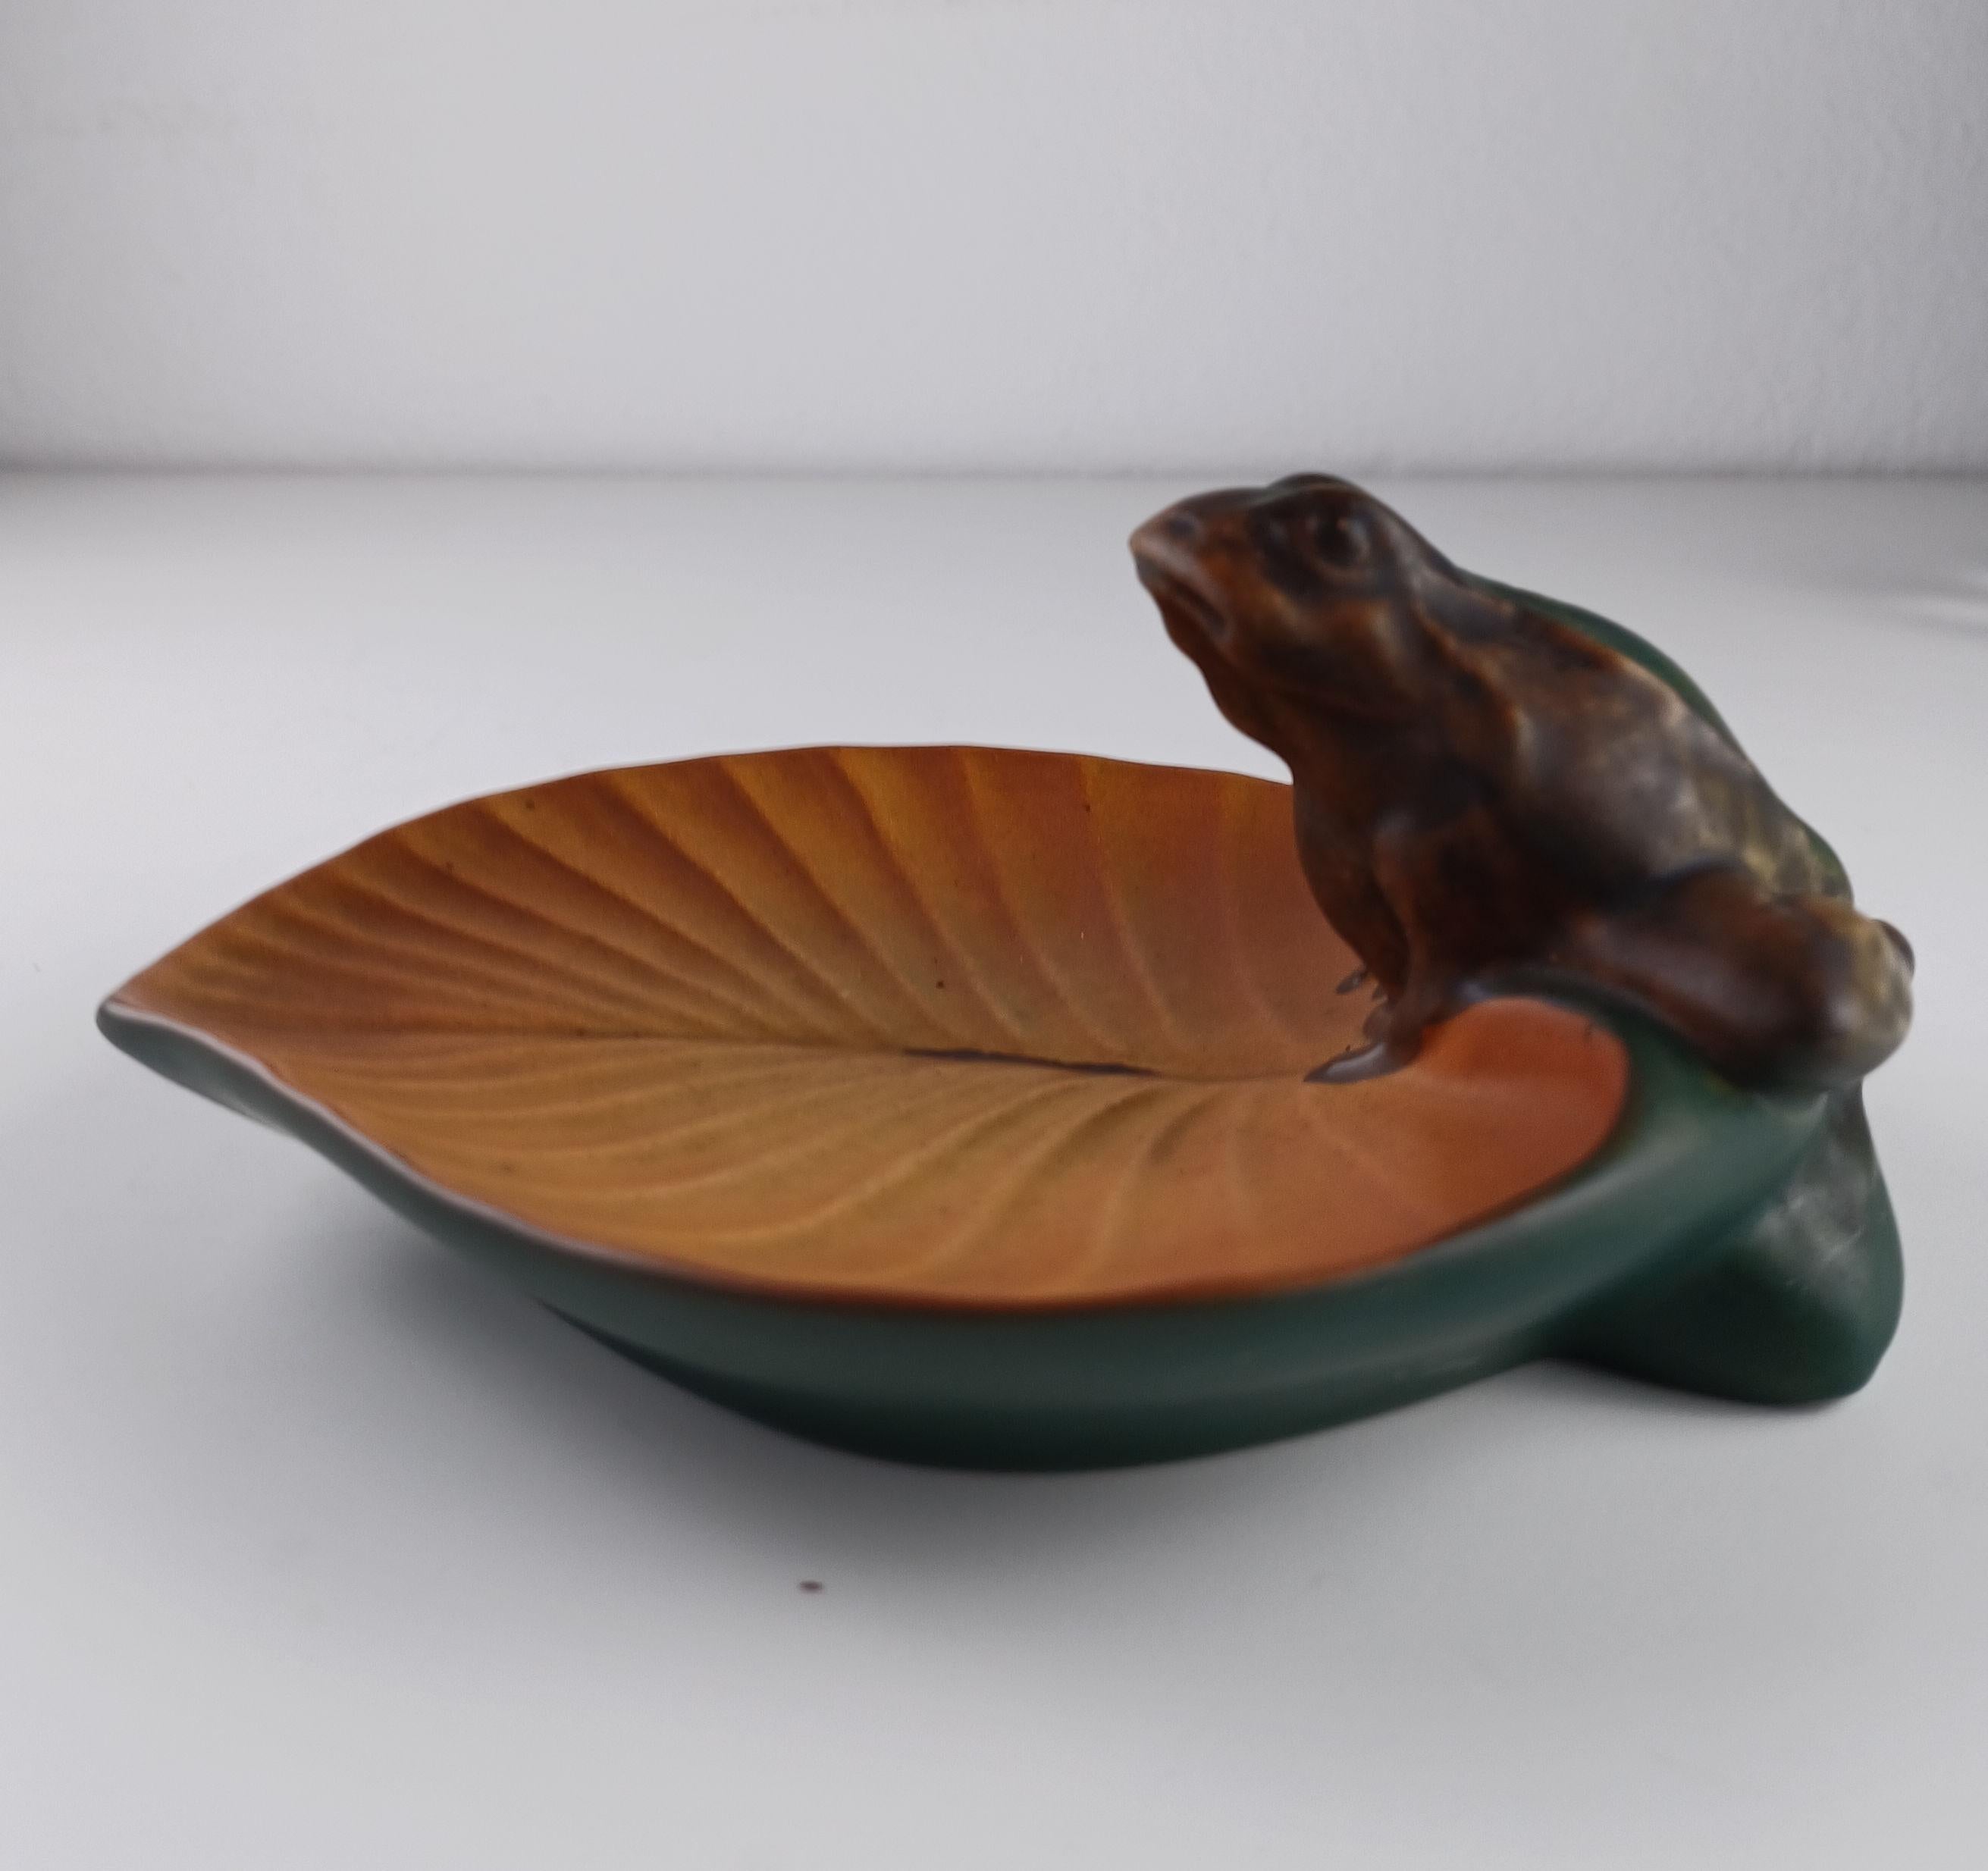 Ceramic 1920's Small Handcrafed Danish Art Nouveau Handcrafted Frog Dish by Ipsens Enke For Sale